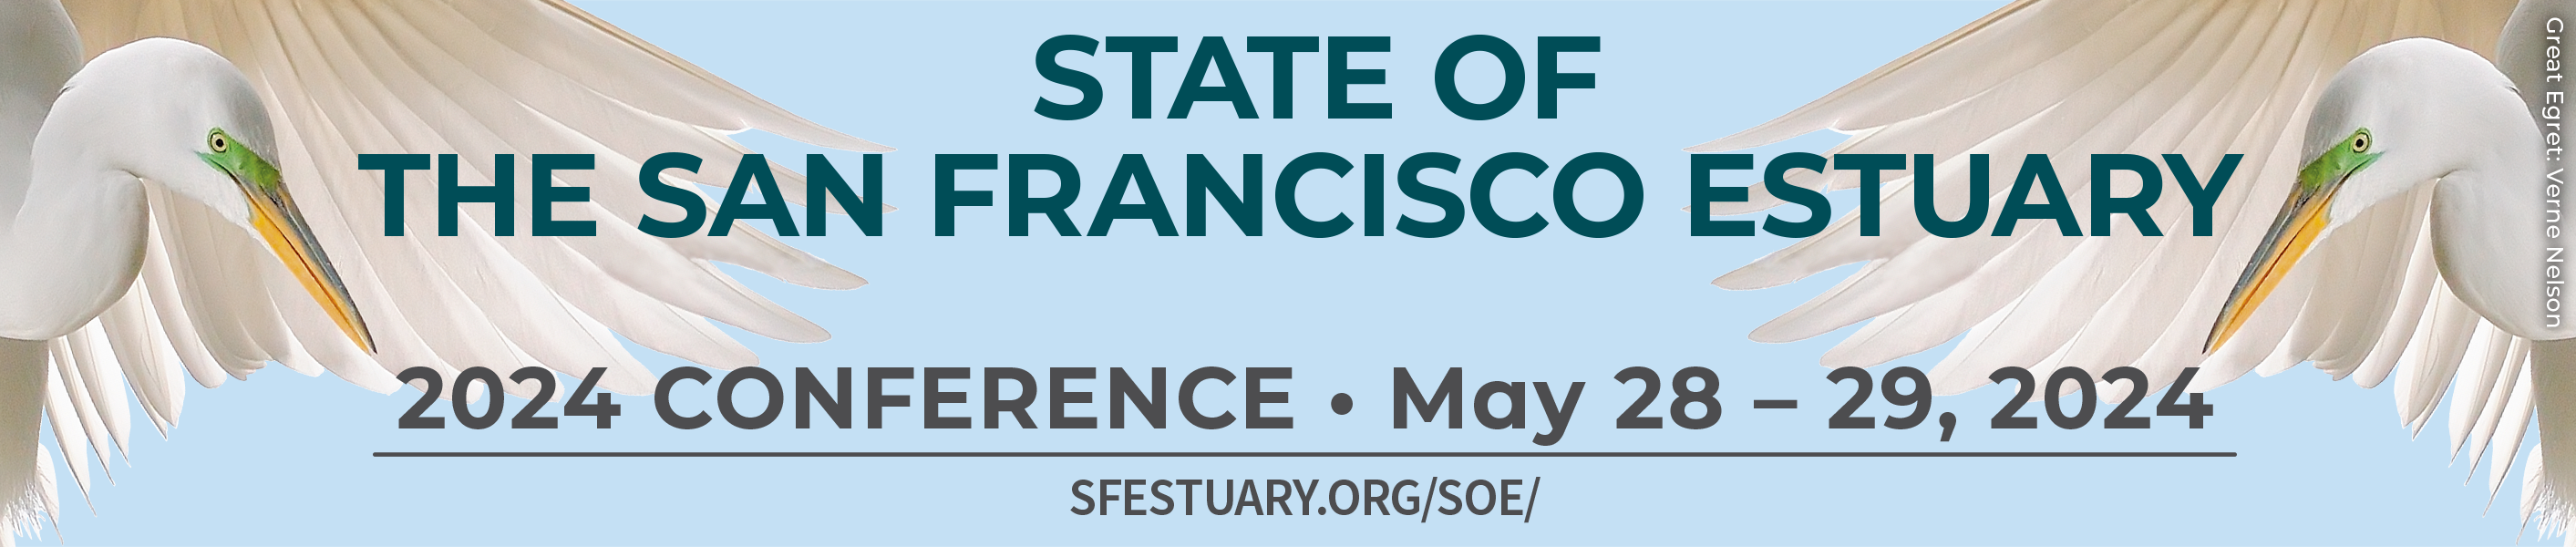 State of the San Francisco Estuary Conference Web Banner